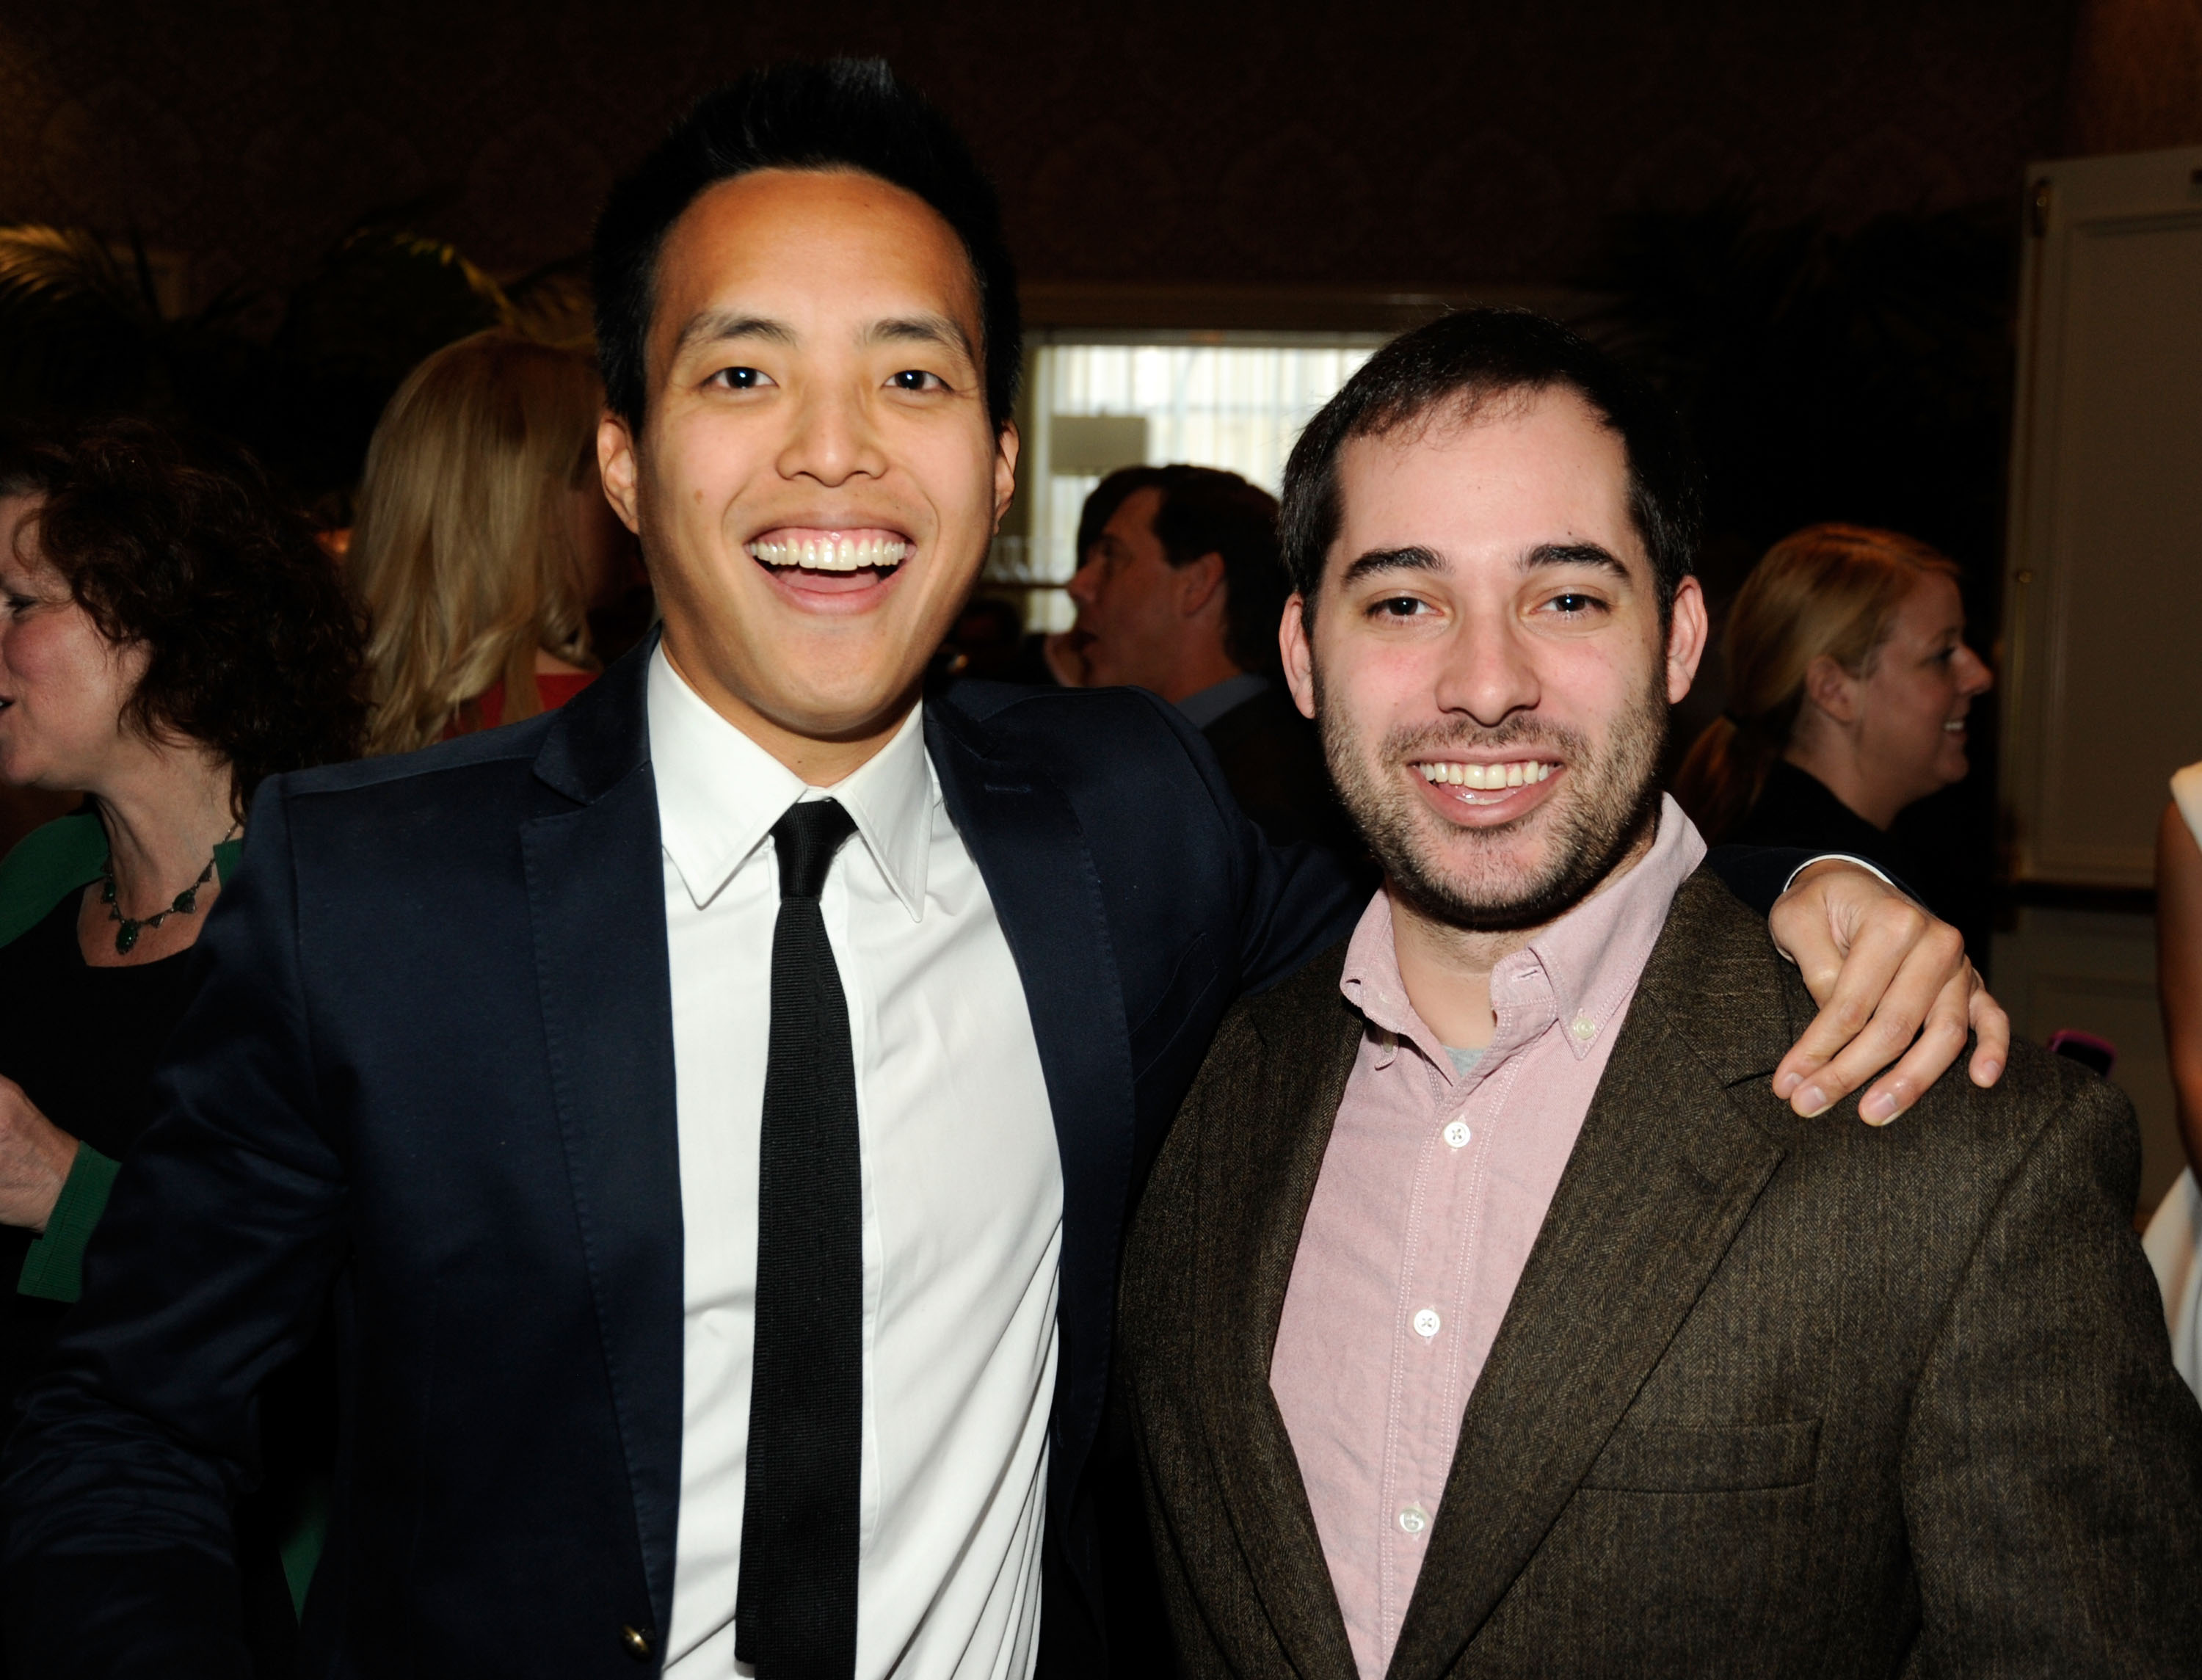 Parks and Recreation writers/producers Alan Yang and Harris Wittels